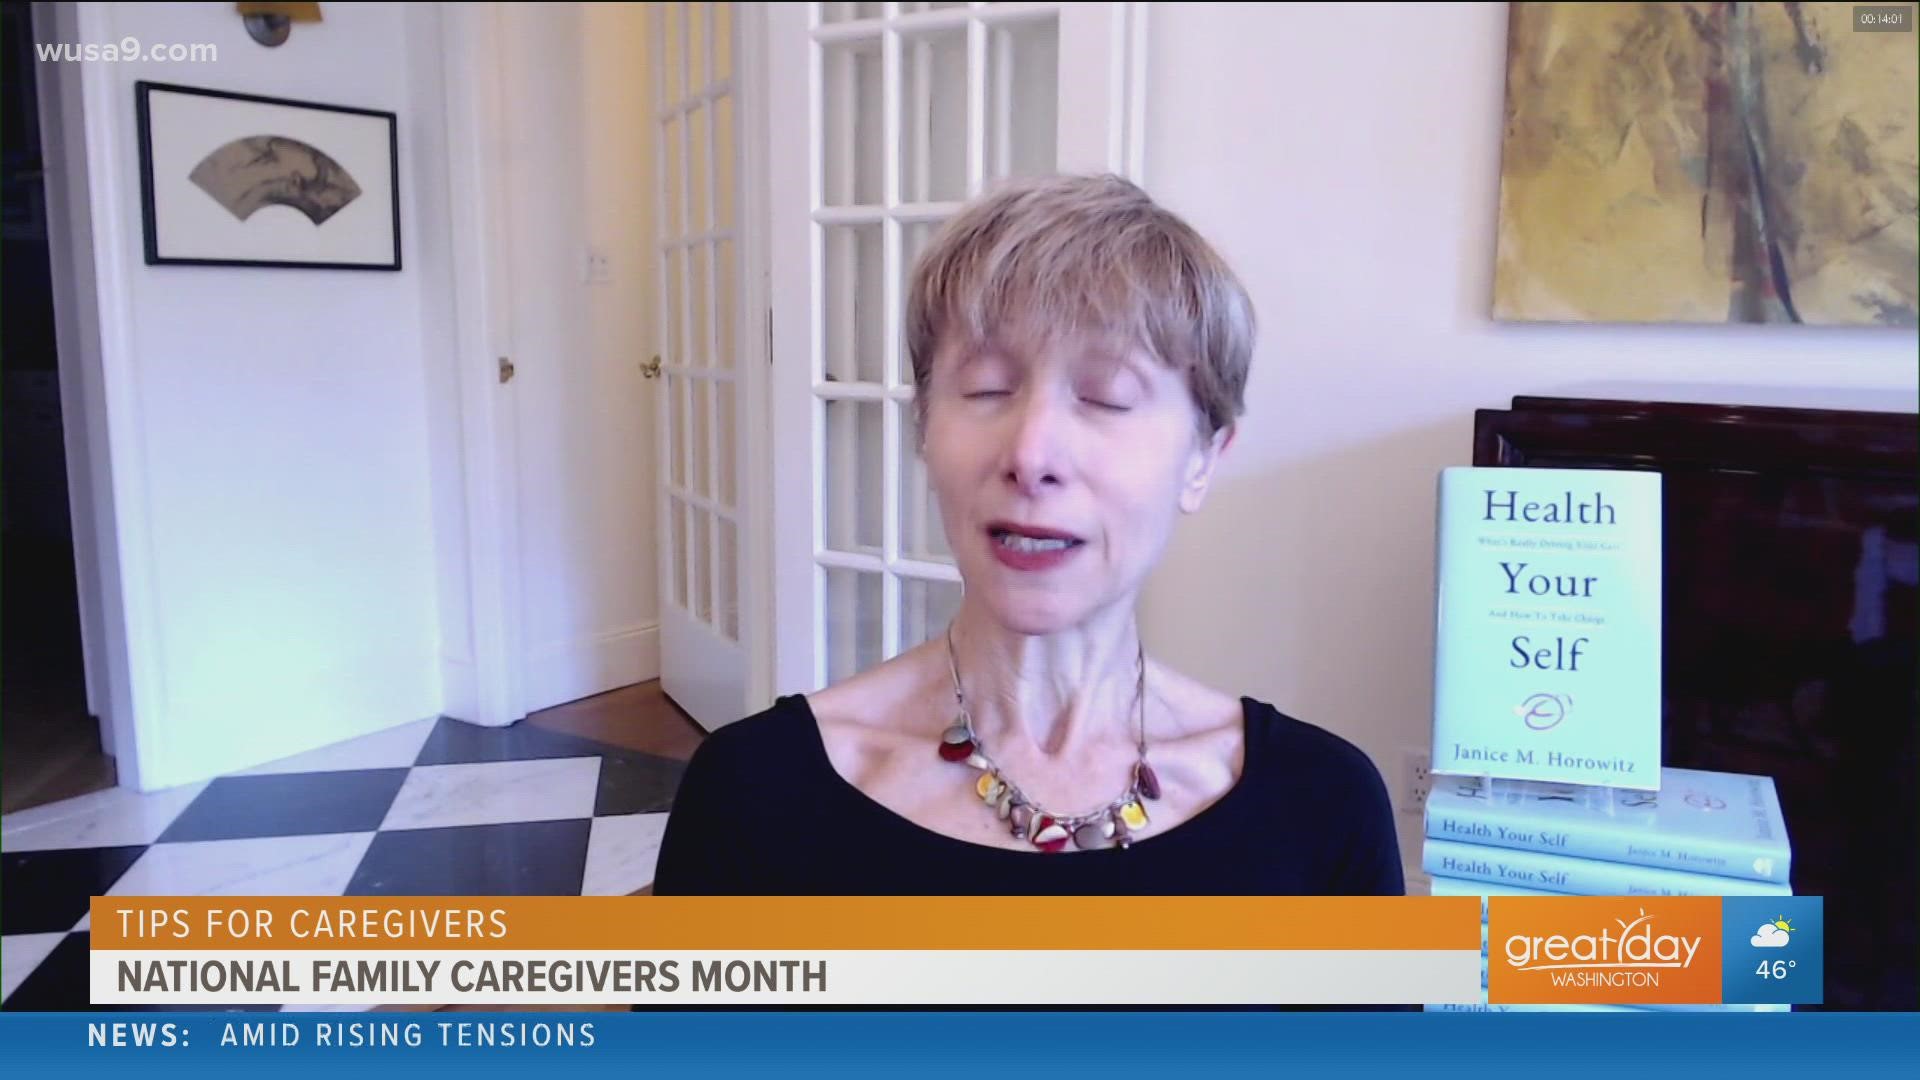 Janice M. Horowitz, author of "Health Your Self" and former Time Magazine health journalist shares tips on being a caregiver.